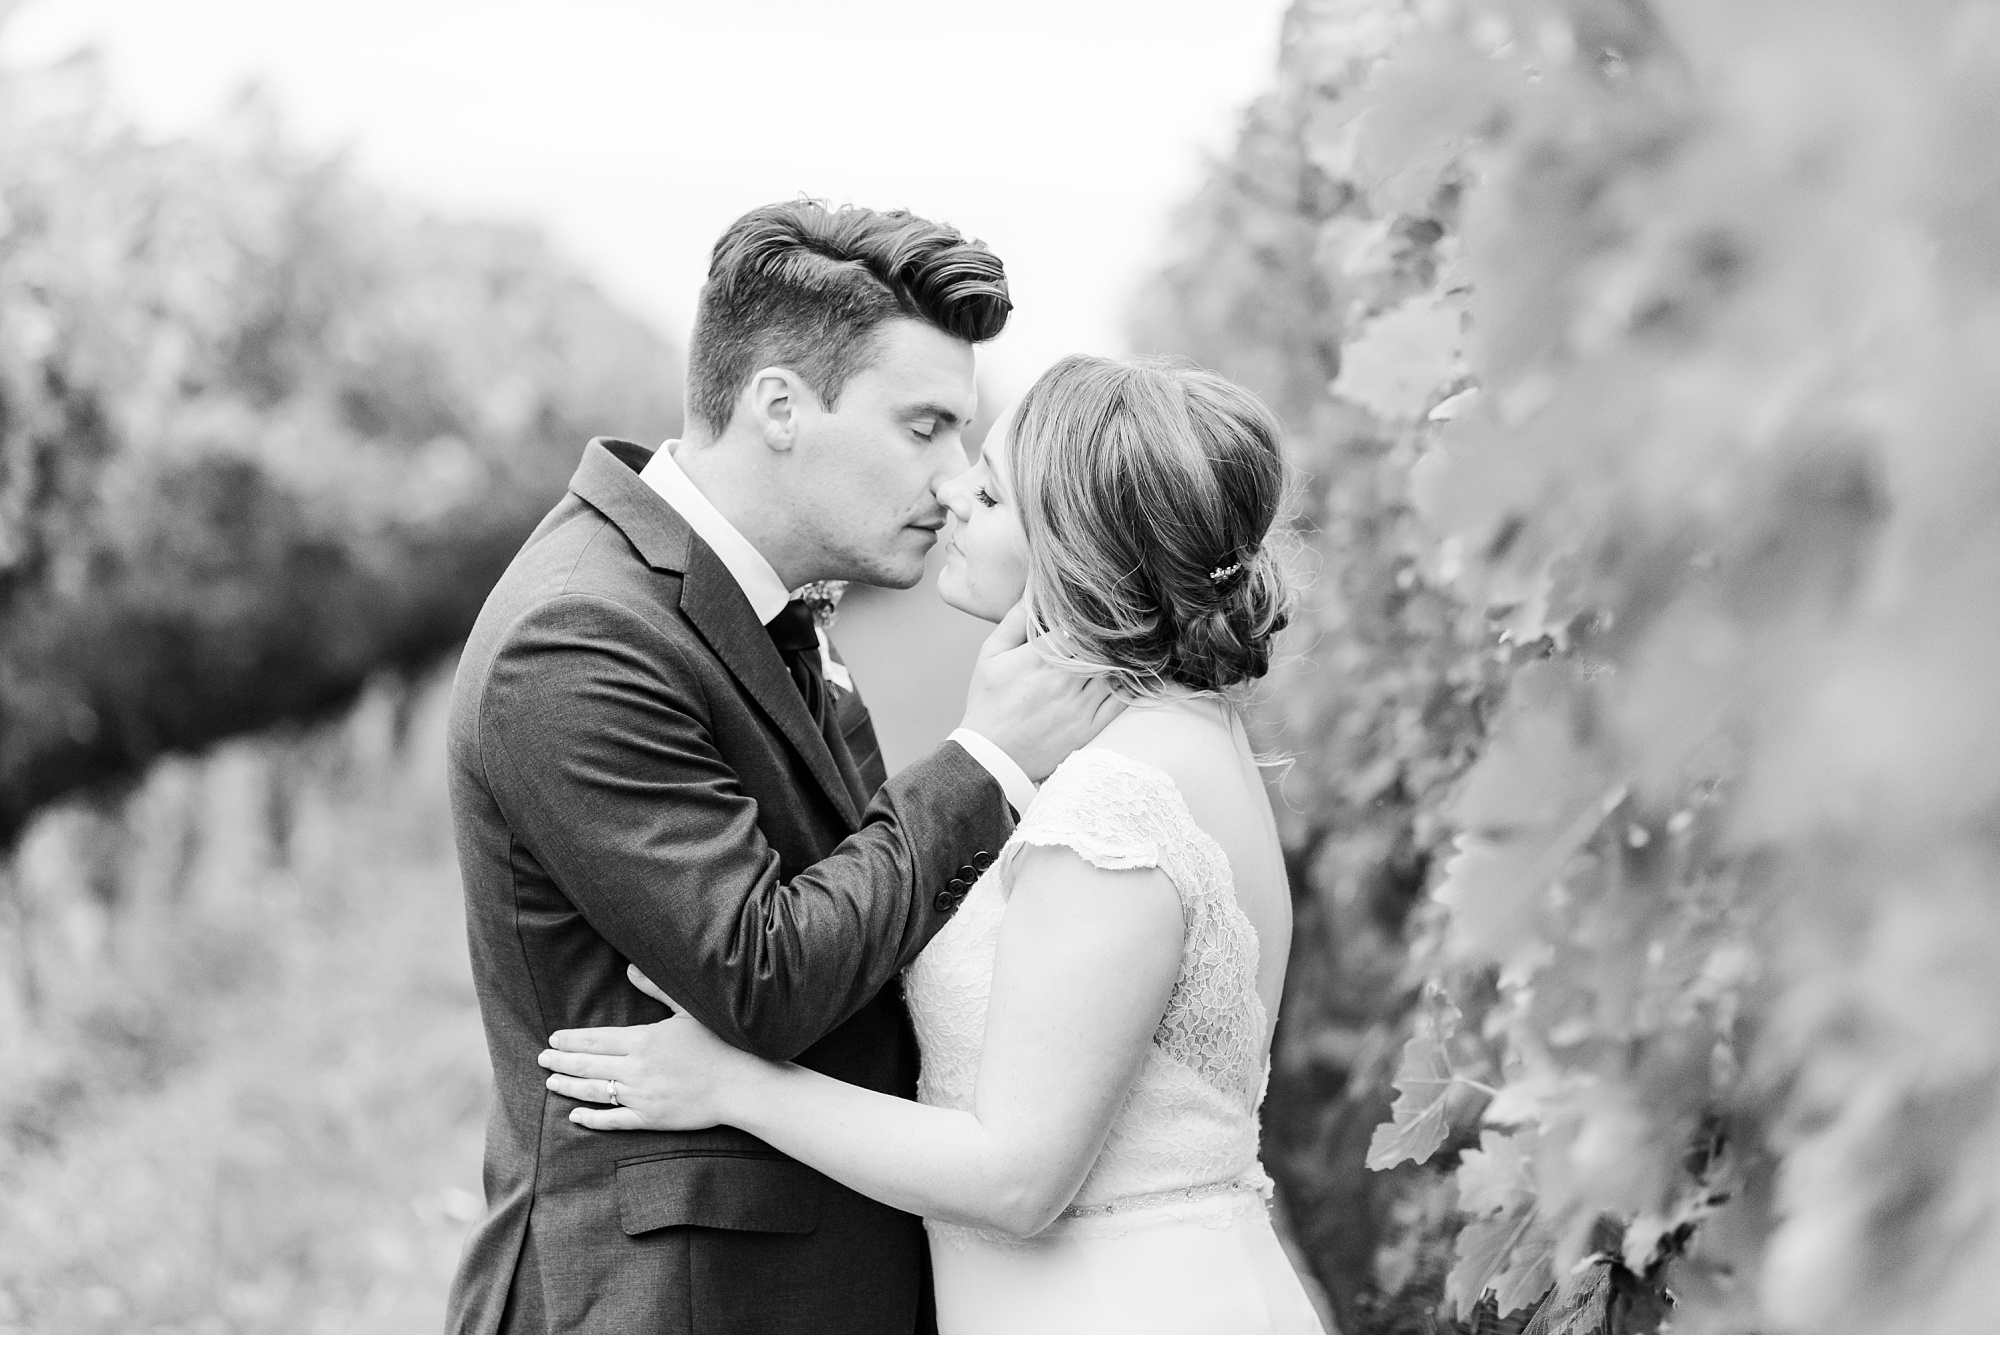 a black and white photo of a bride and groom about to kiss. used in a blog post about 10 questions to ask a wedding photographer